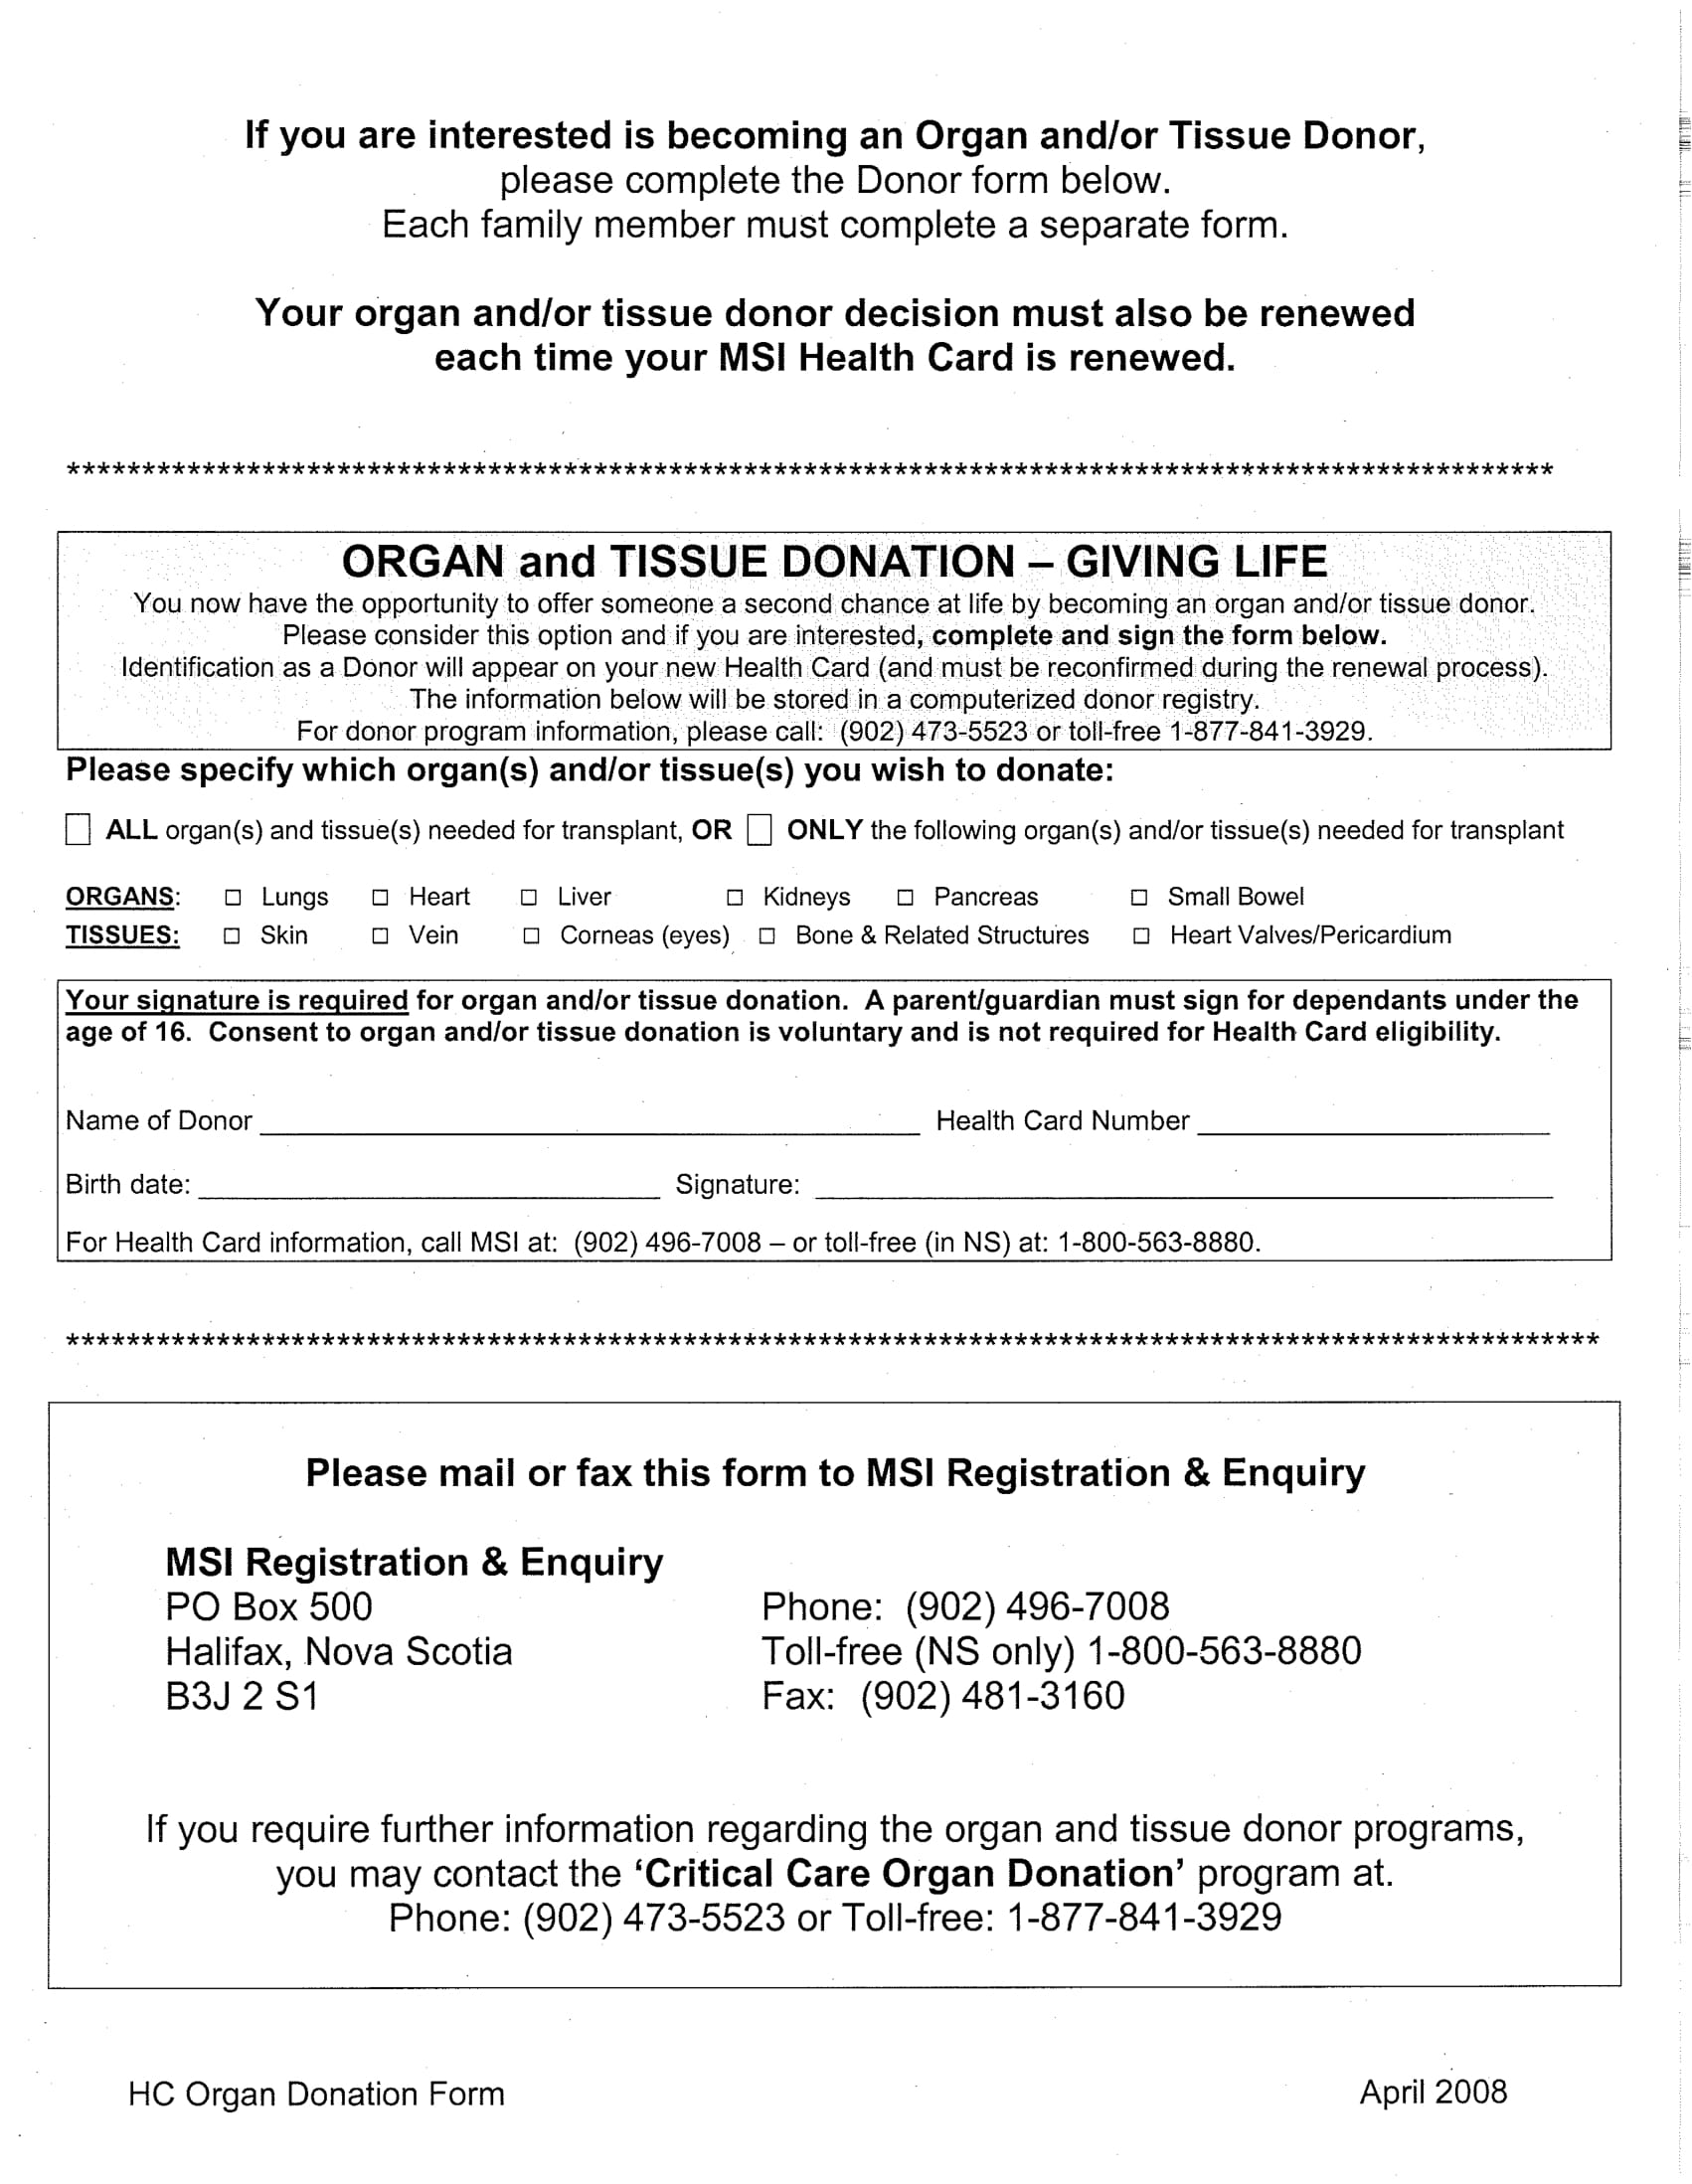 organ and tissue donation form 1